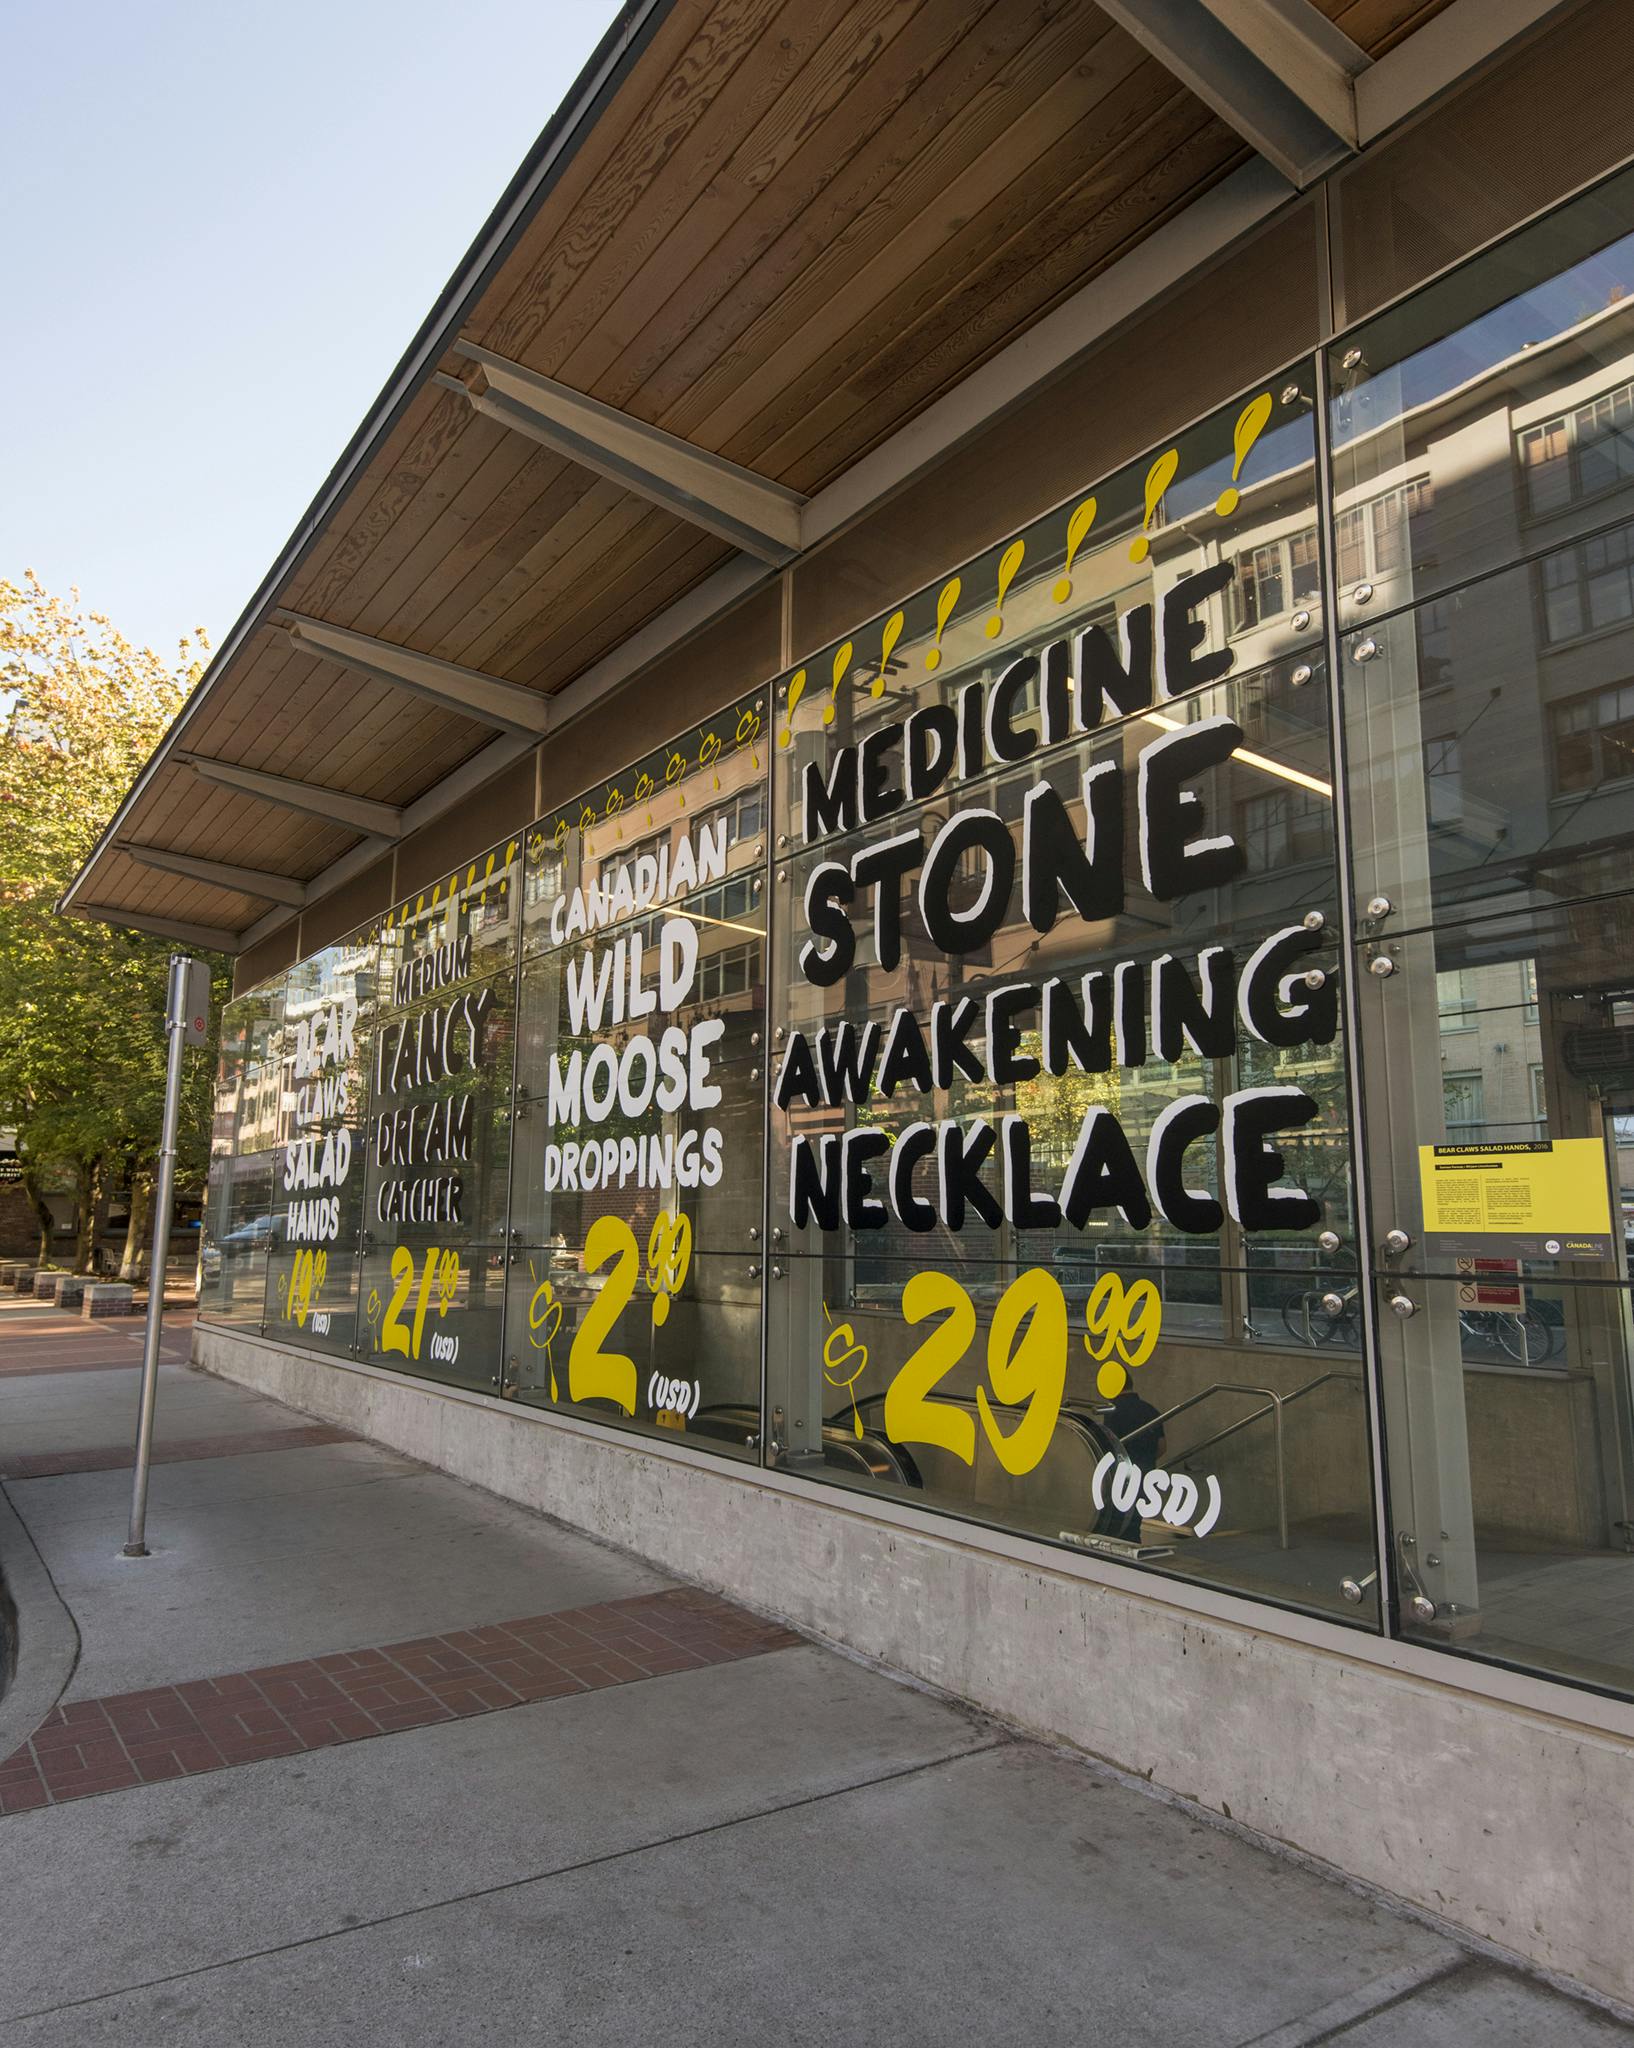 Text-based artworks in vinyl are installed on the glass facade of Yaletown-Roundhouse Station, resembling hand painted signs. One reads: “MEDICINE STONE AWAKENING NECKLACE $29.99 (USD).”